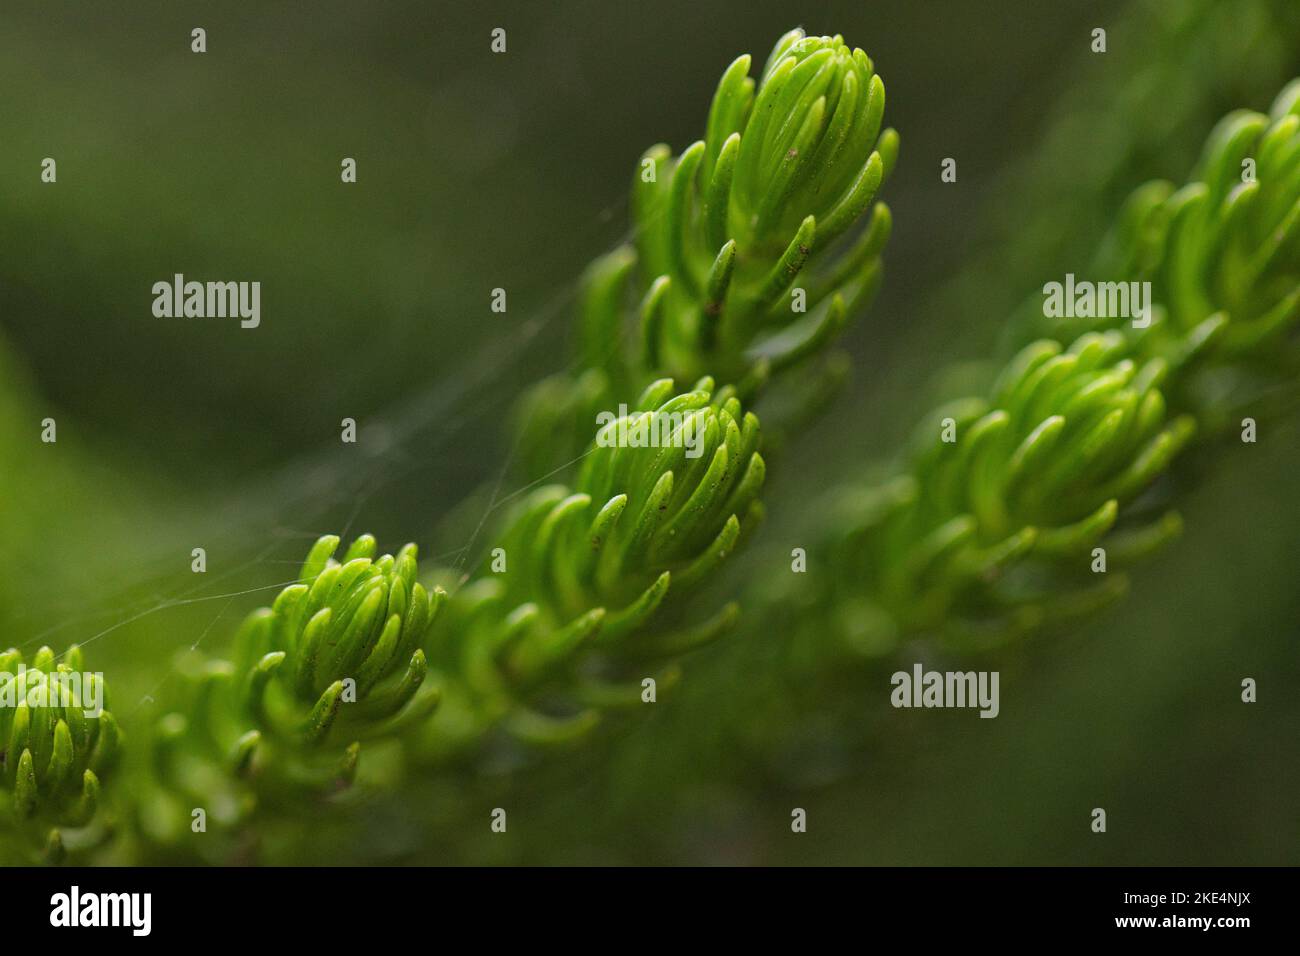 A macro view of Dacrydium plant branches growing with green needles Stock Photo